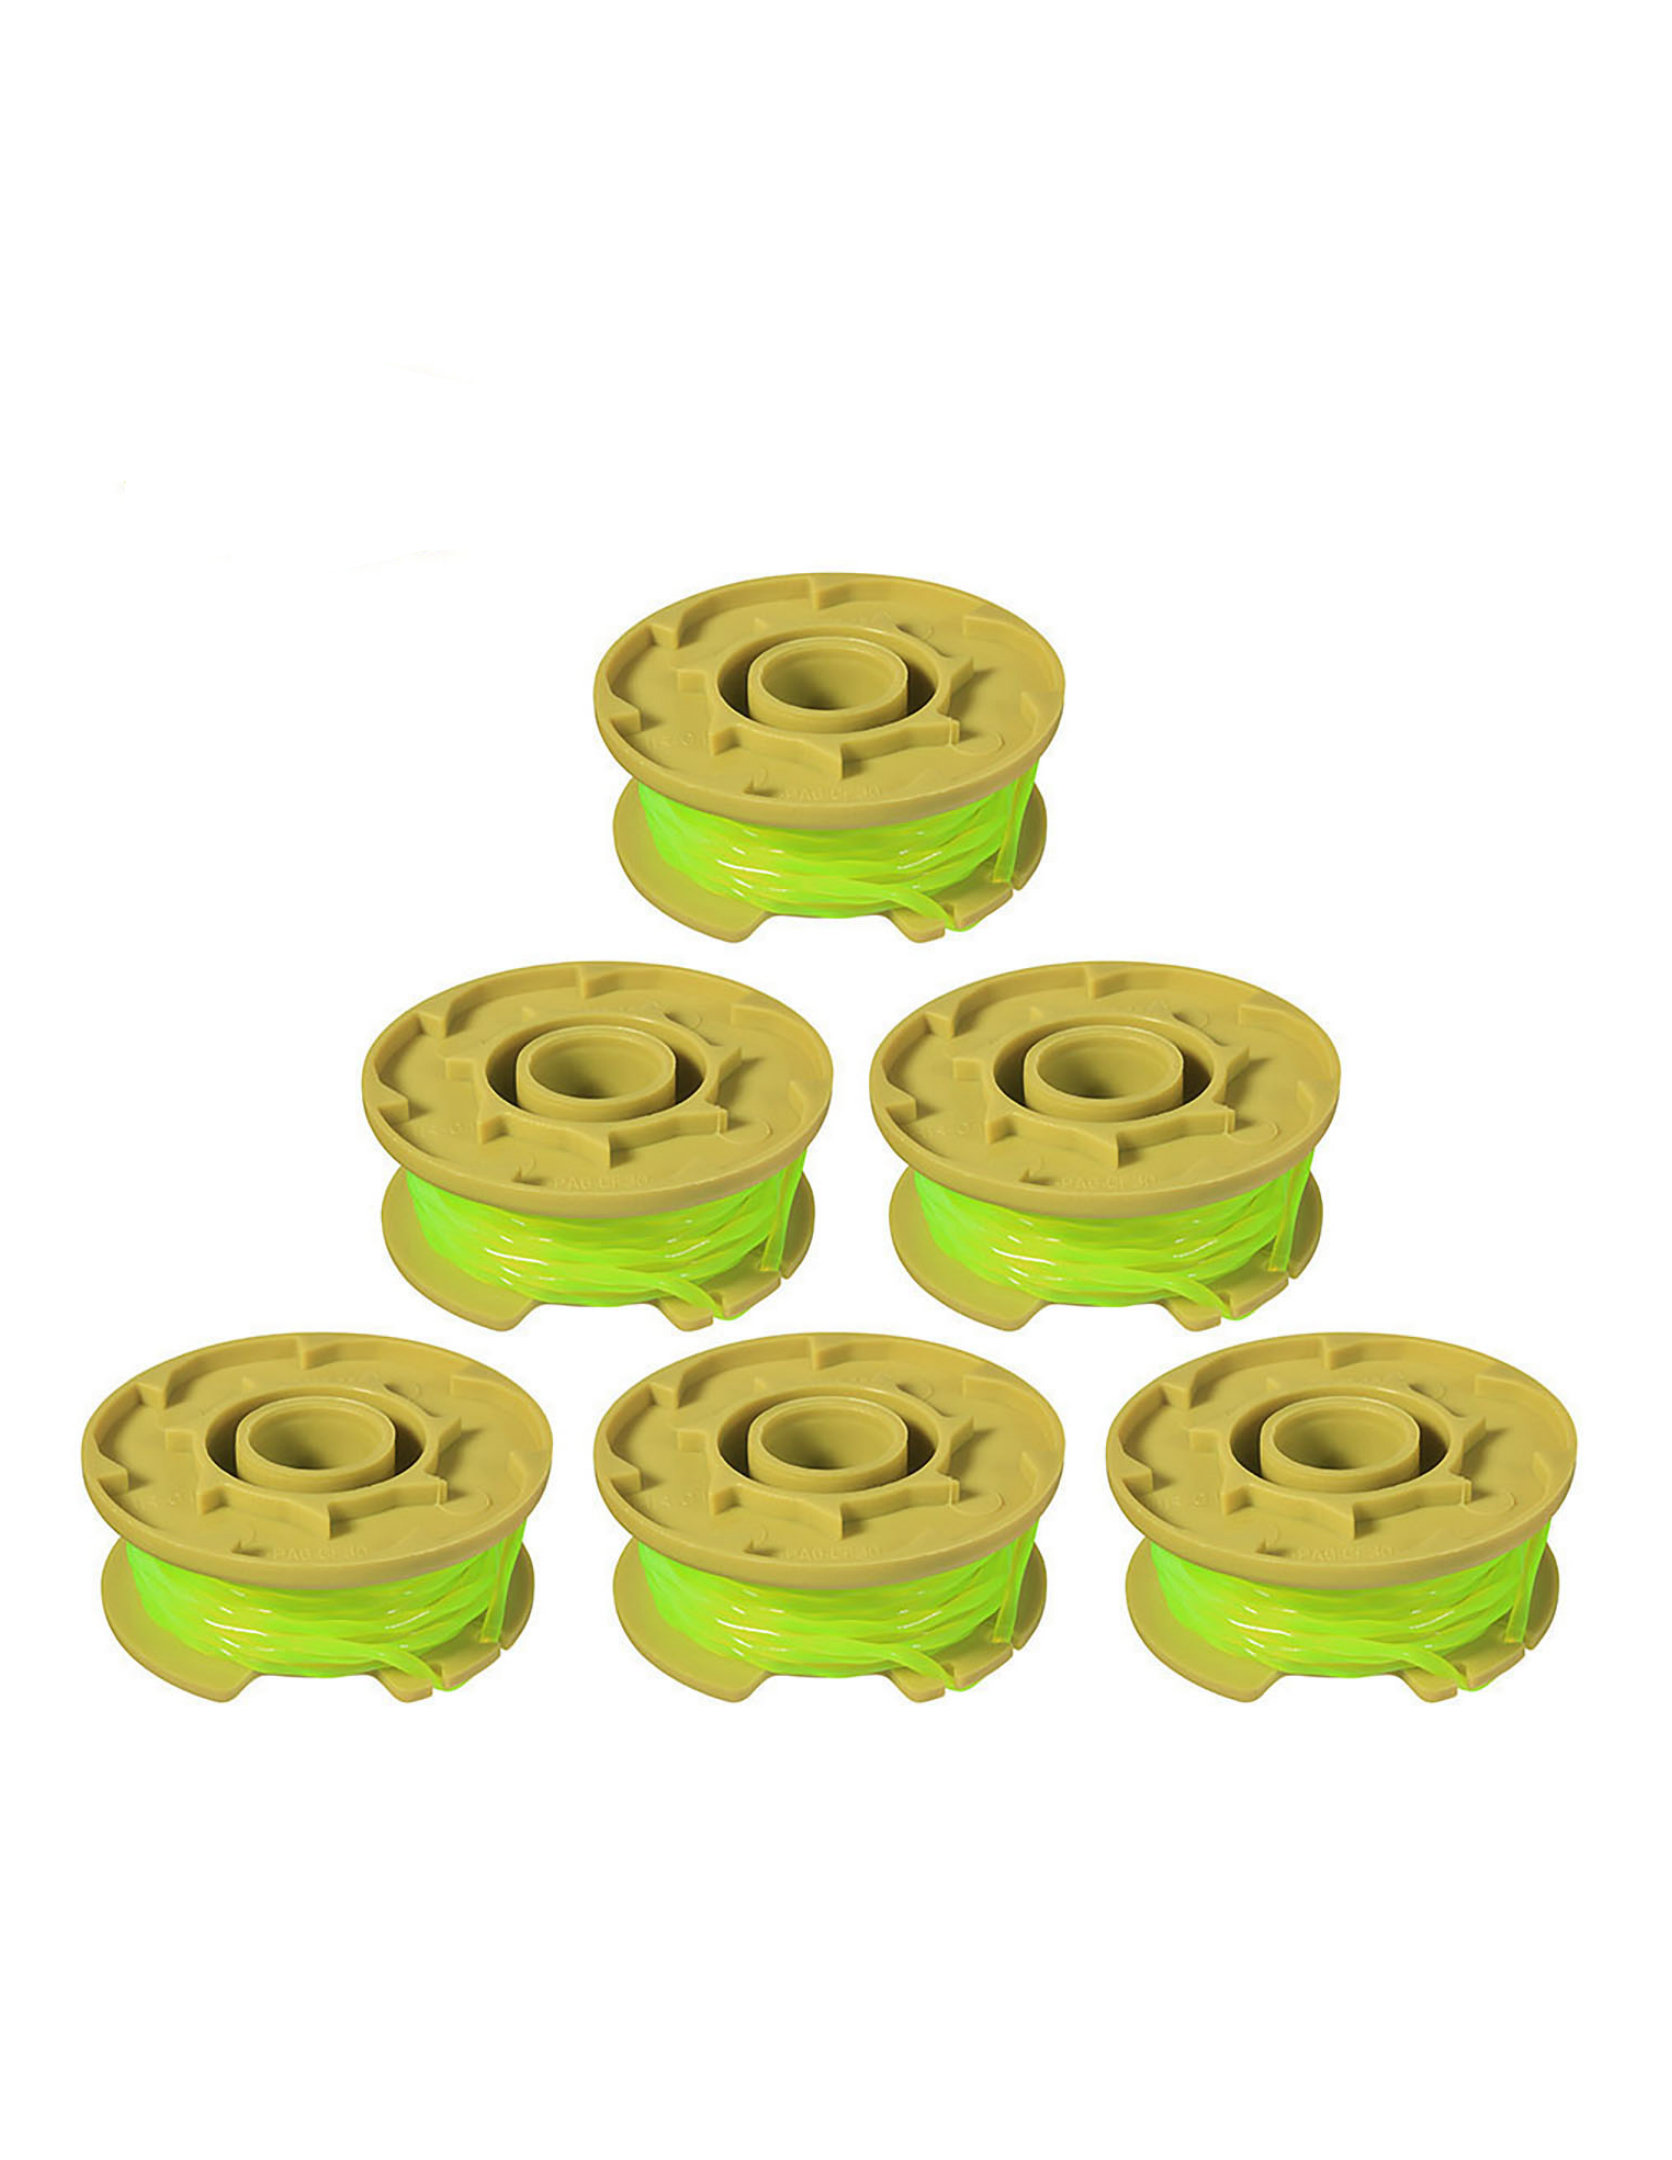 THTEN 0.080" 11ft Replacement Trimmer Spool Compatible Ryobi One Plus AC80RL3 for Ryobi 18v, 24v, and 40v Cordless Trimmers (6 Pack)